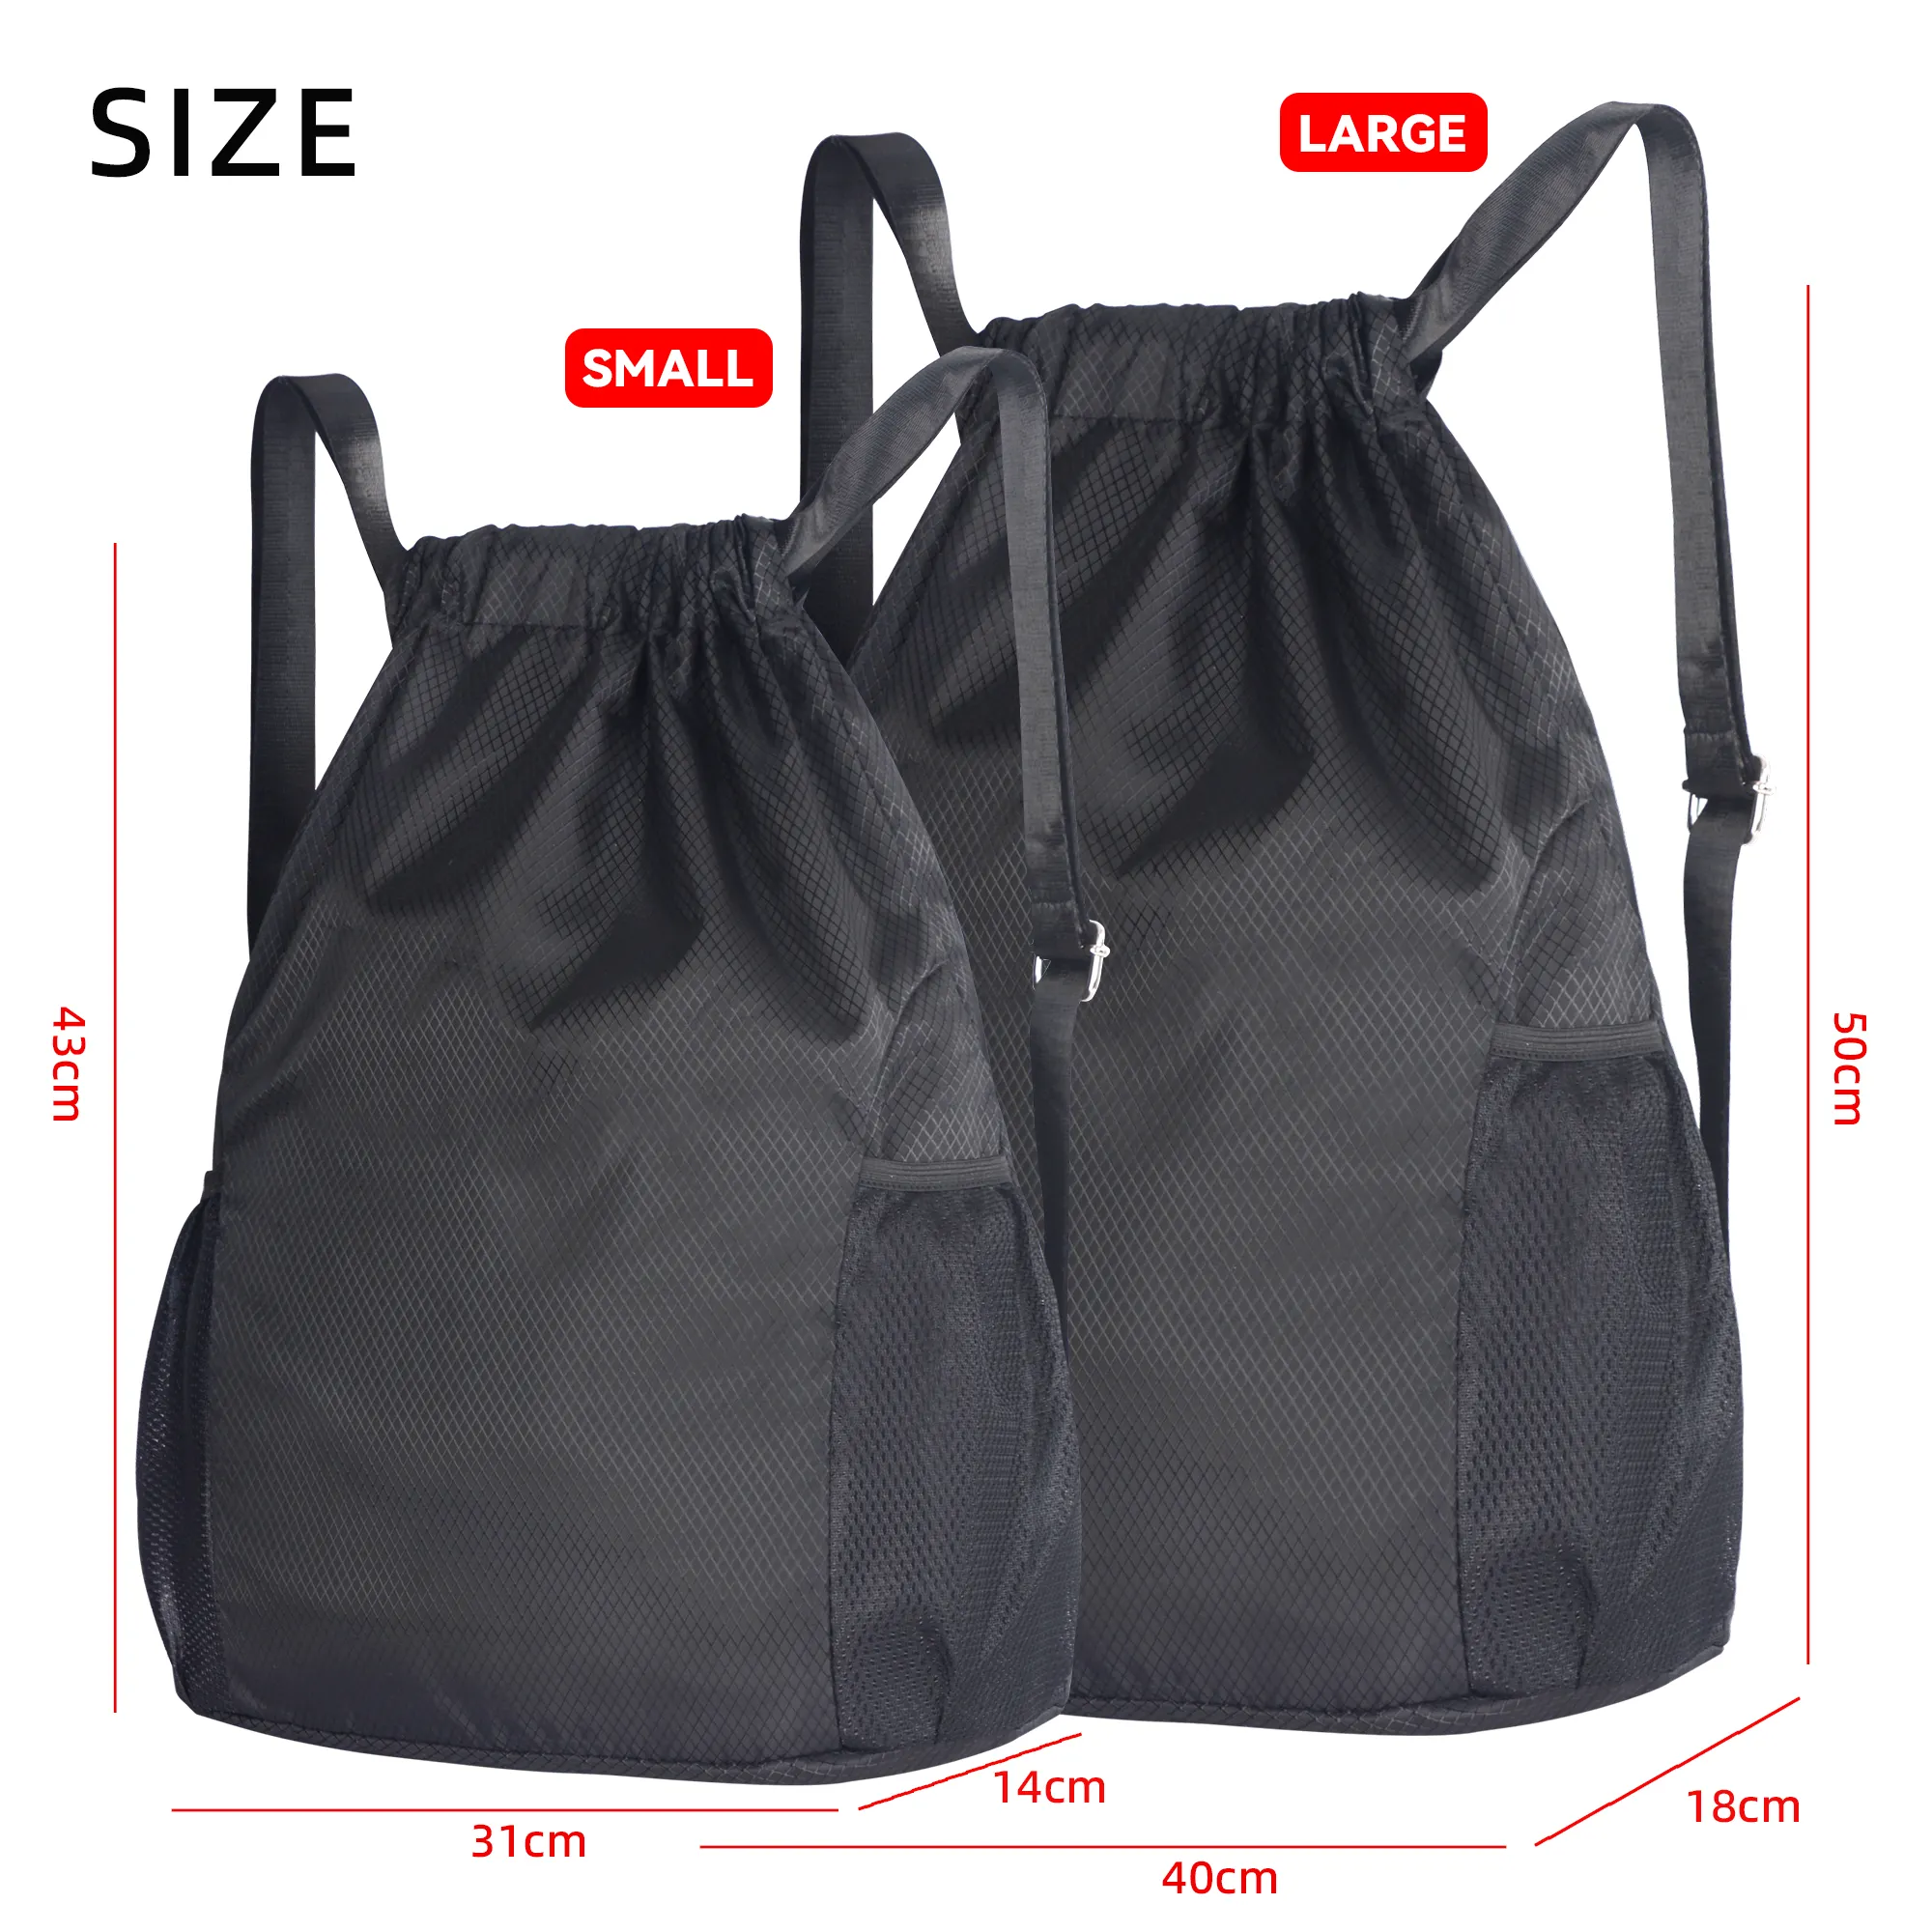 Waterproof Workout Travel Swimming Sports Drawstring Gym Backpack Bag with Zipper Pocket for Men Women